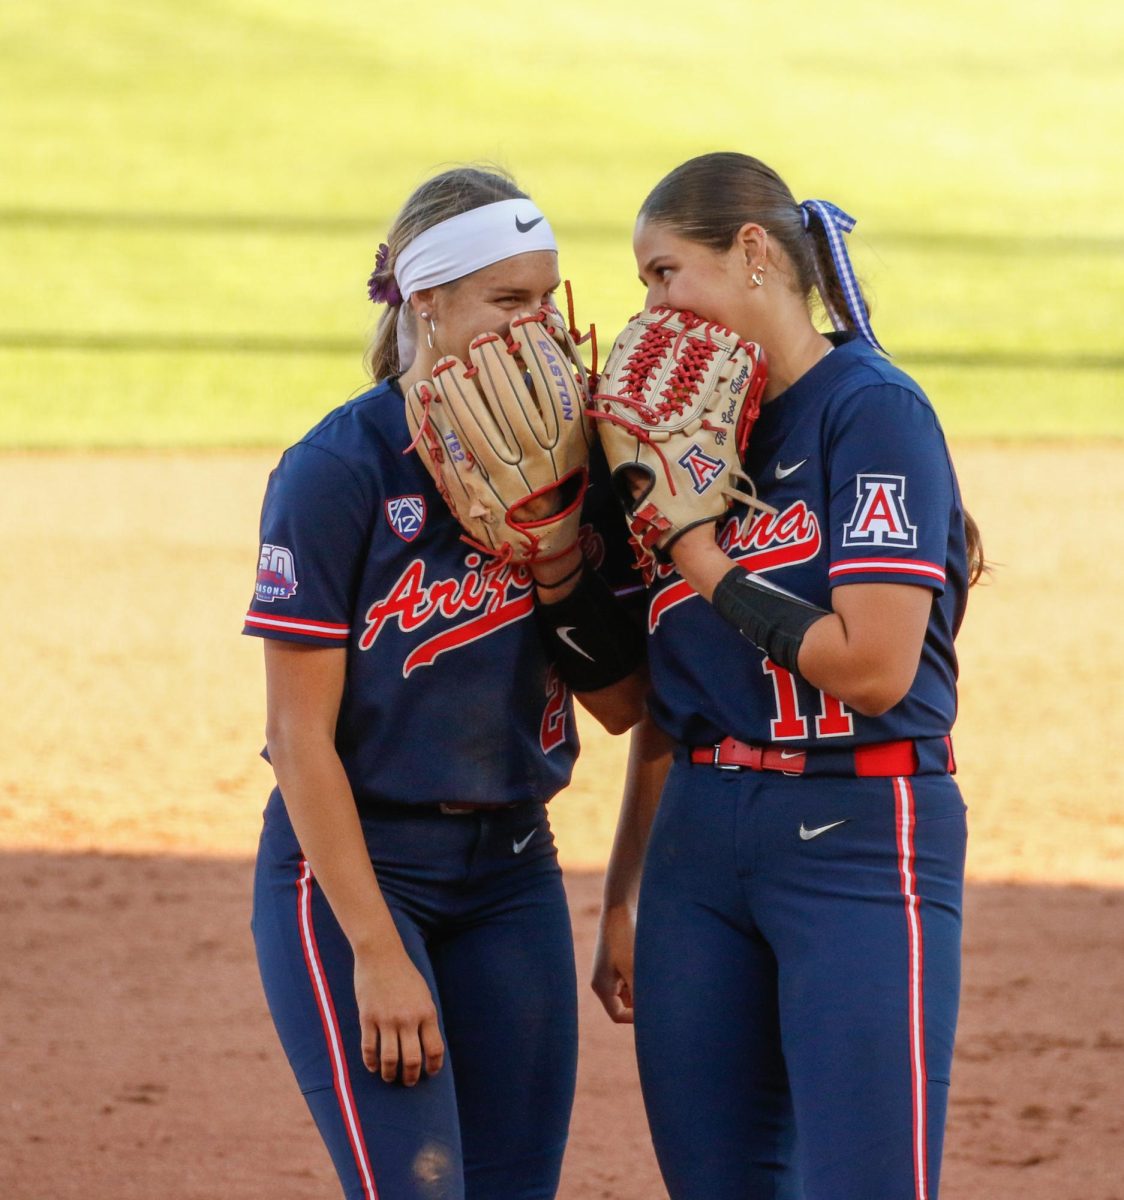 After+walking+a+batter+short+stop+Tayler+Biehl+talks+to+pitcher+Miranda+Stroddard+at+Rita+Hillenbrand+Stadium+on+March+16.+The+Wildcats+lost+the+game+against+No.+8+University+of+Washington+11-3.+